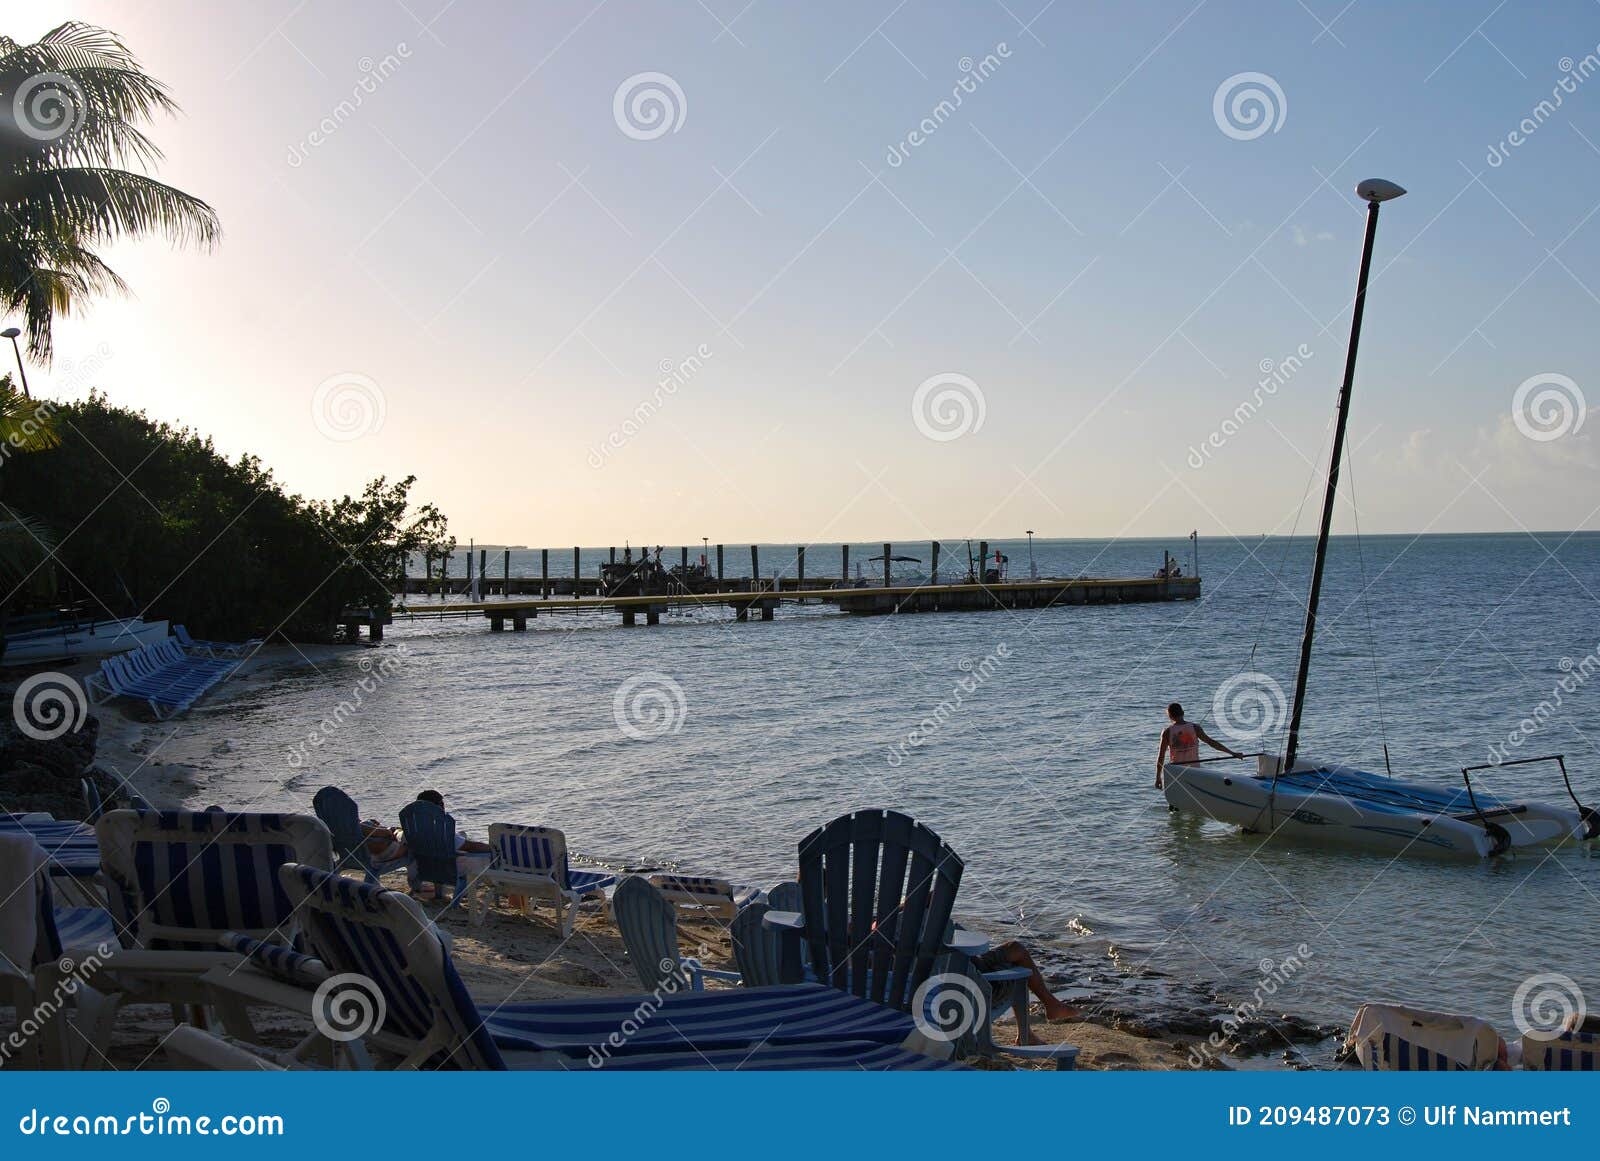 sunset at an scenic beach on the island of key largo in the florida keys